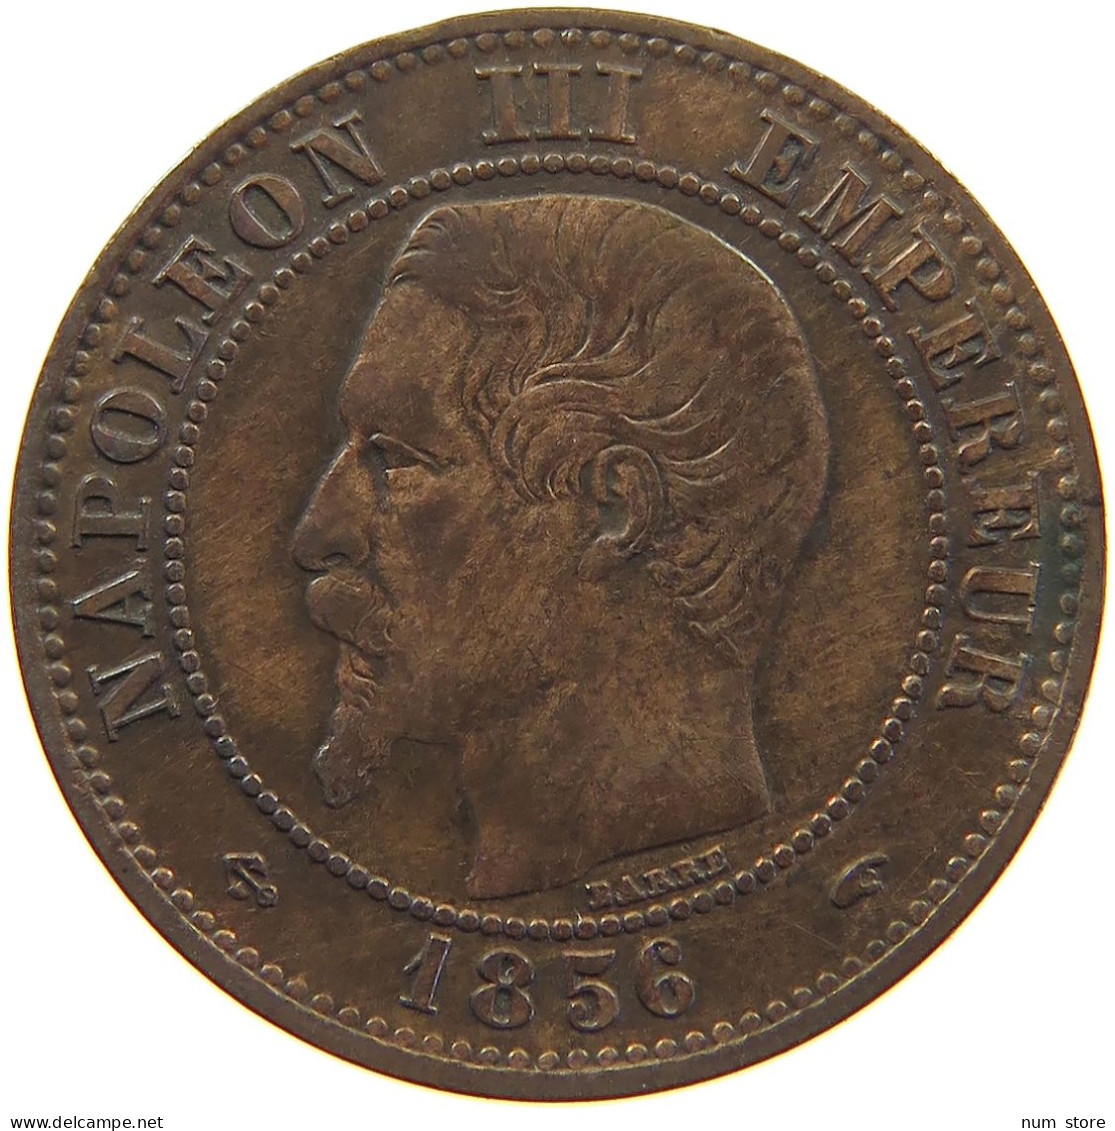 FRANCE 2 CENTIMES 1856 A Napoleon III. (1852-1870) #c016 0427 - 2 Centimes